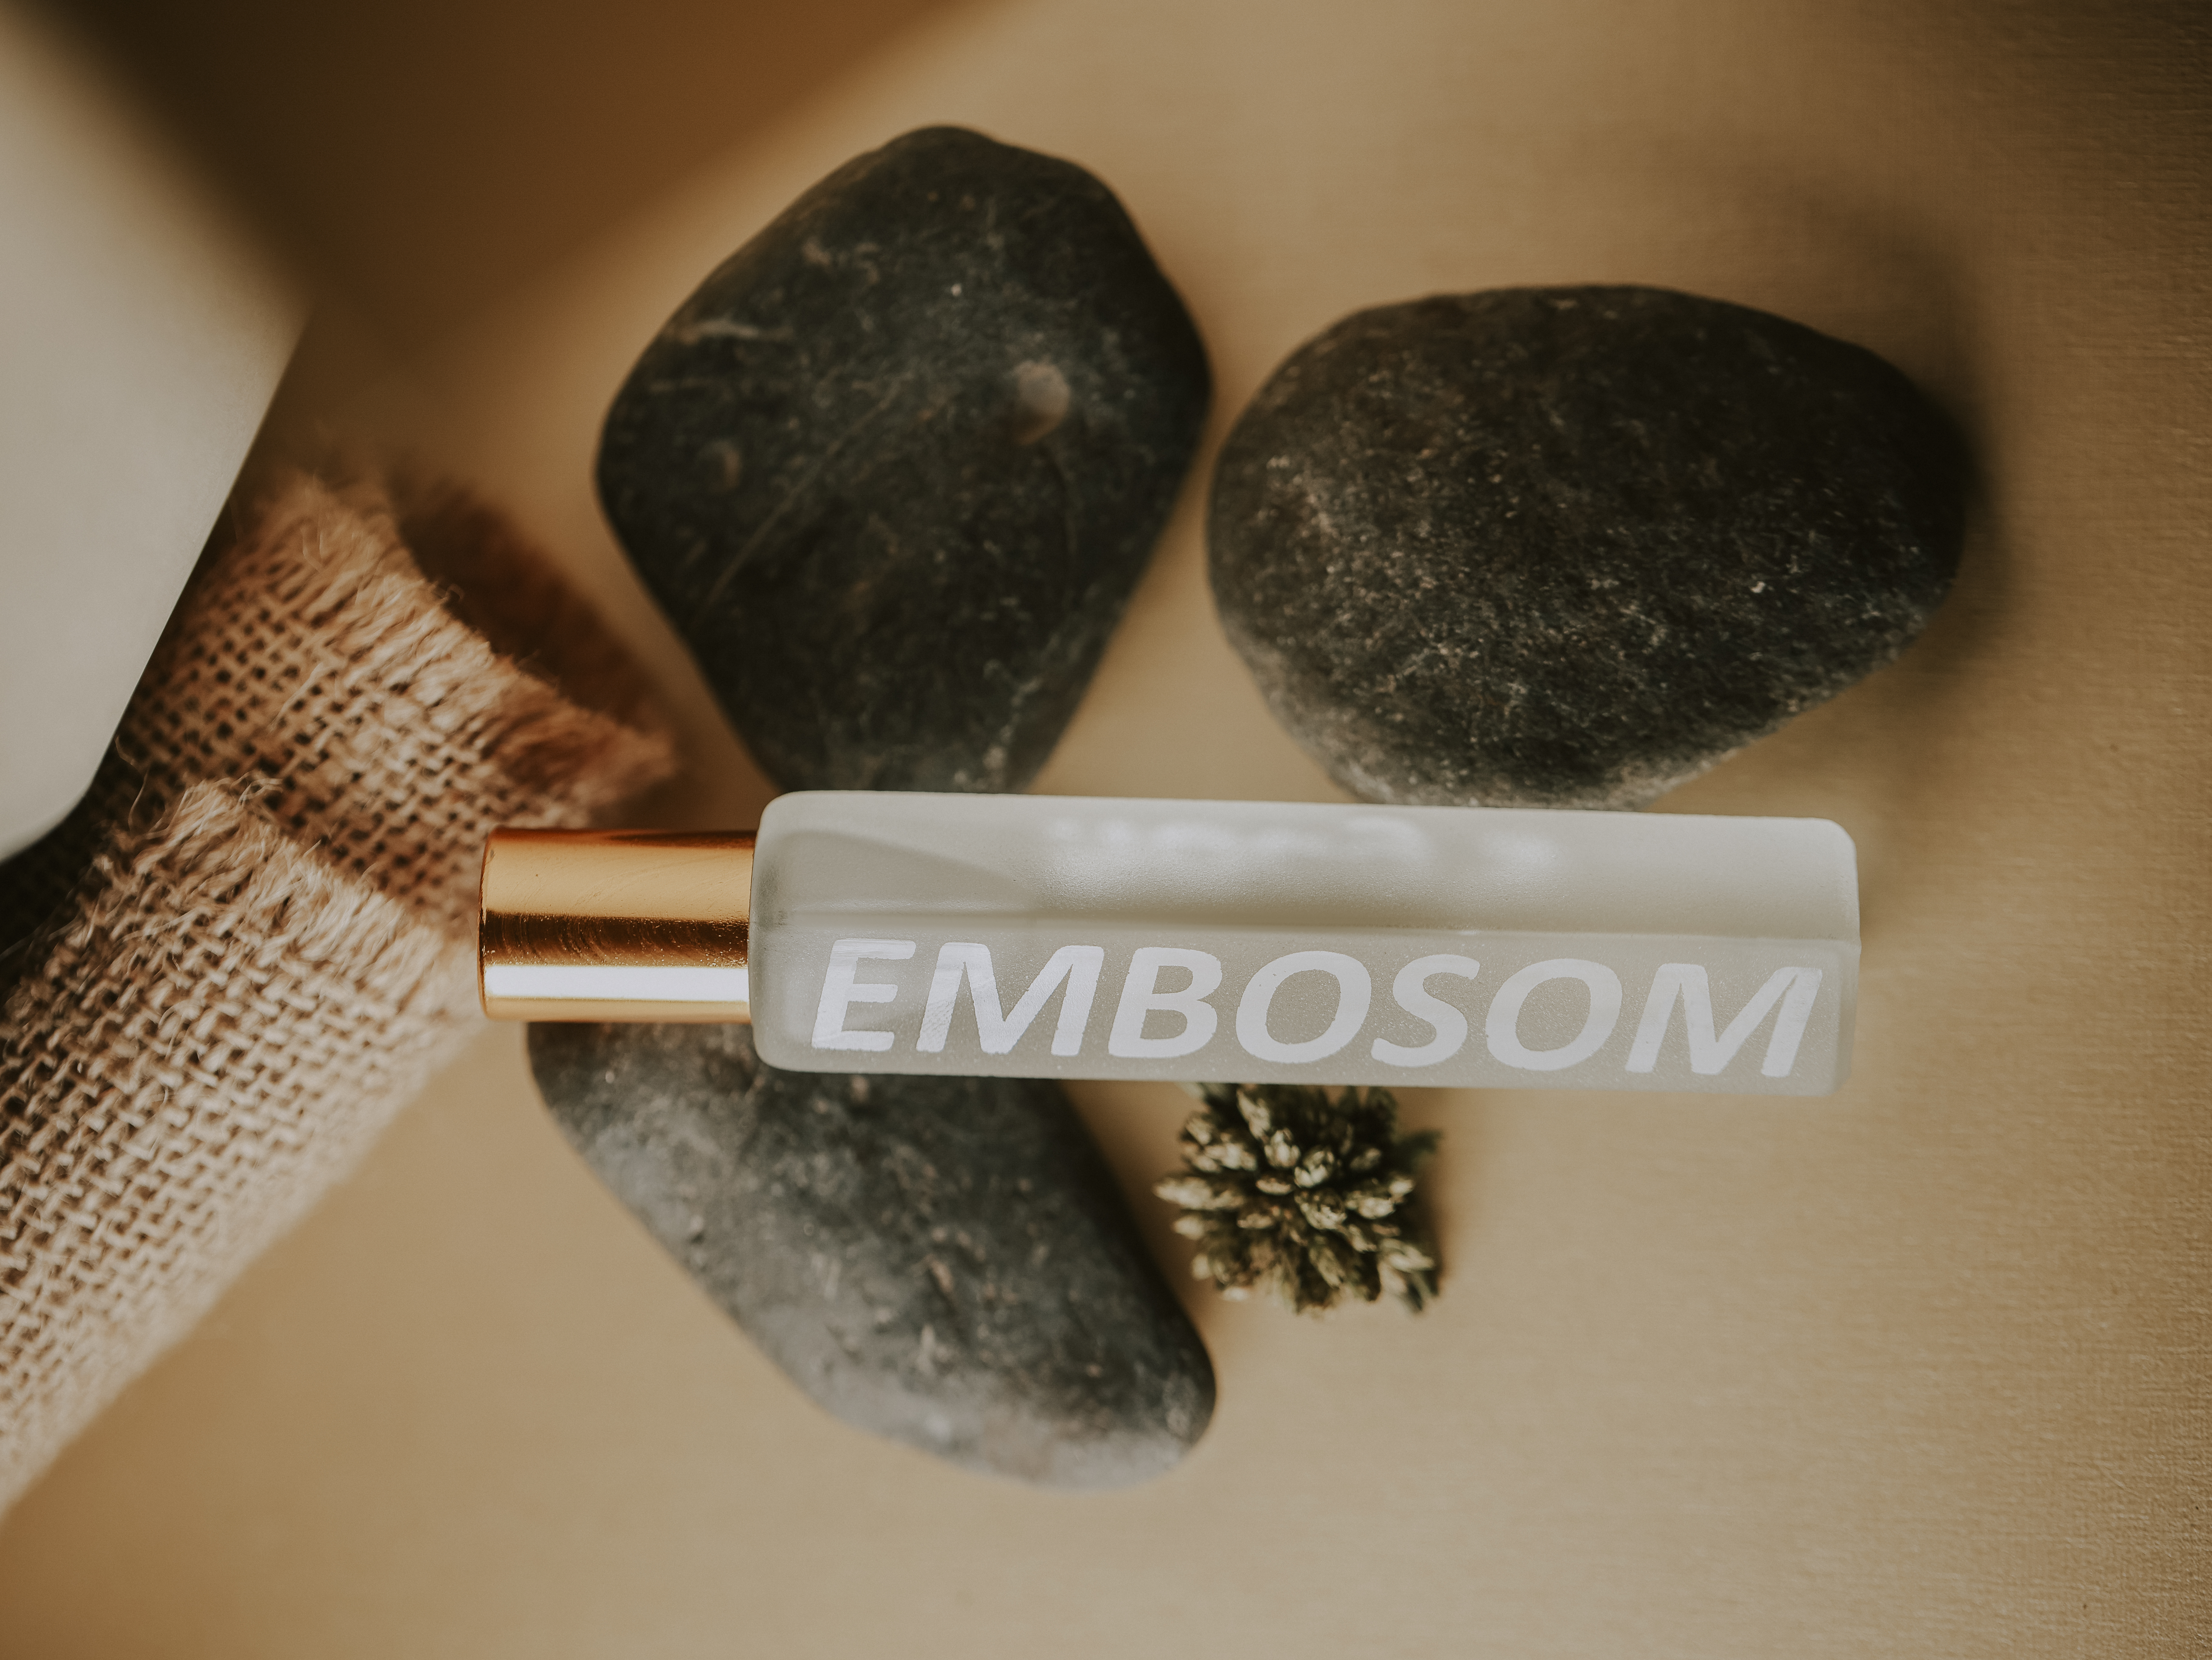 embosom citrus green floral aromatic woody ambery musky perfume